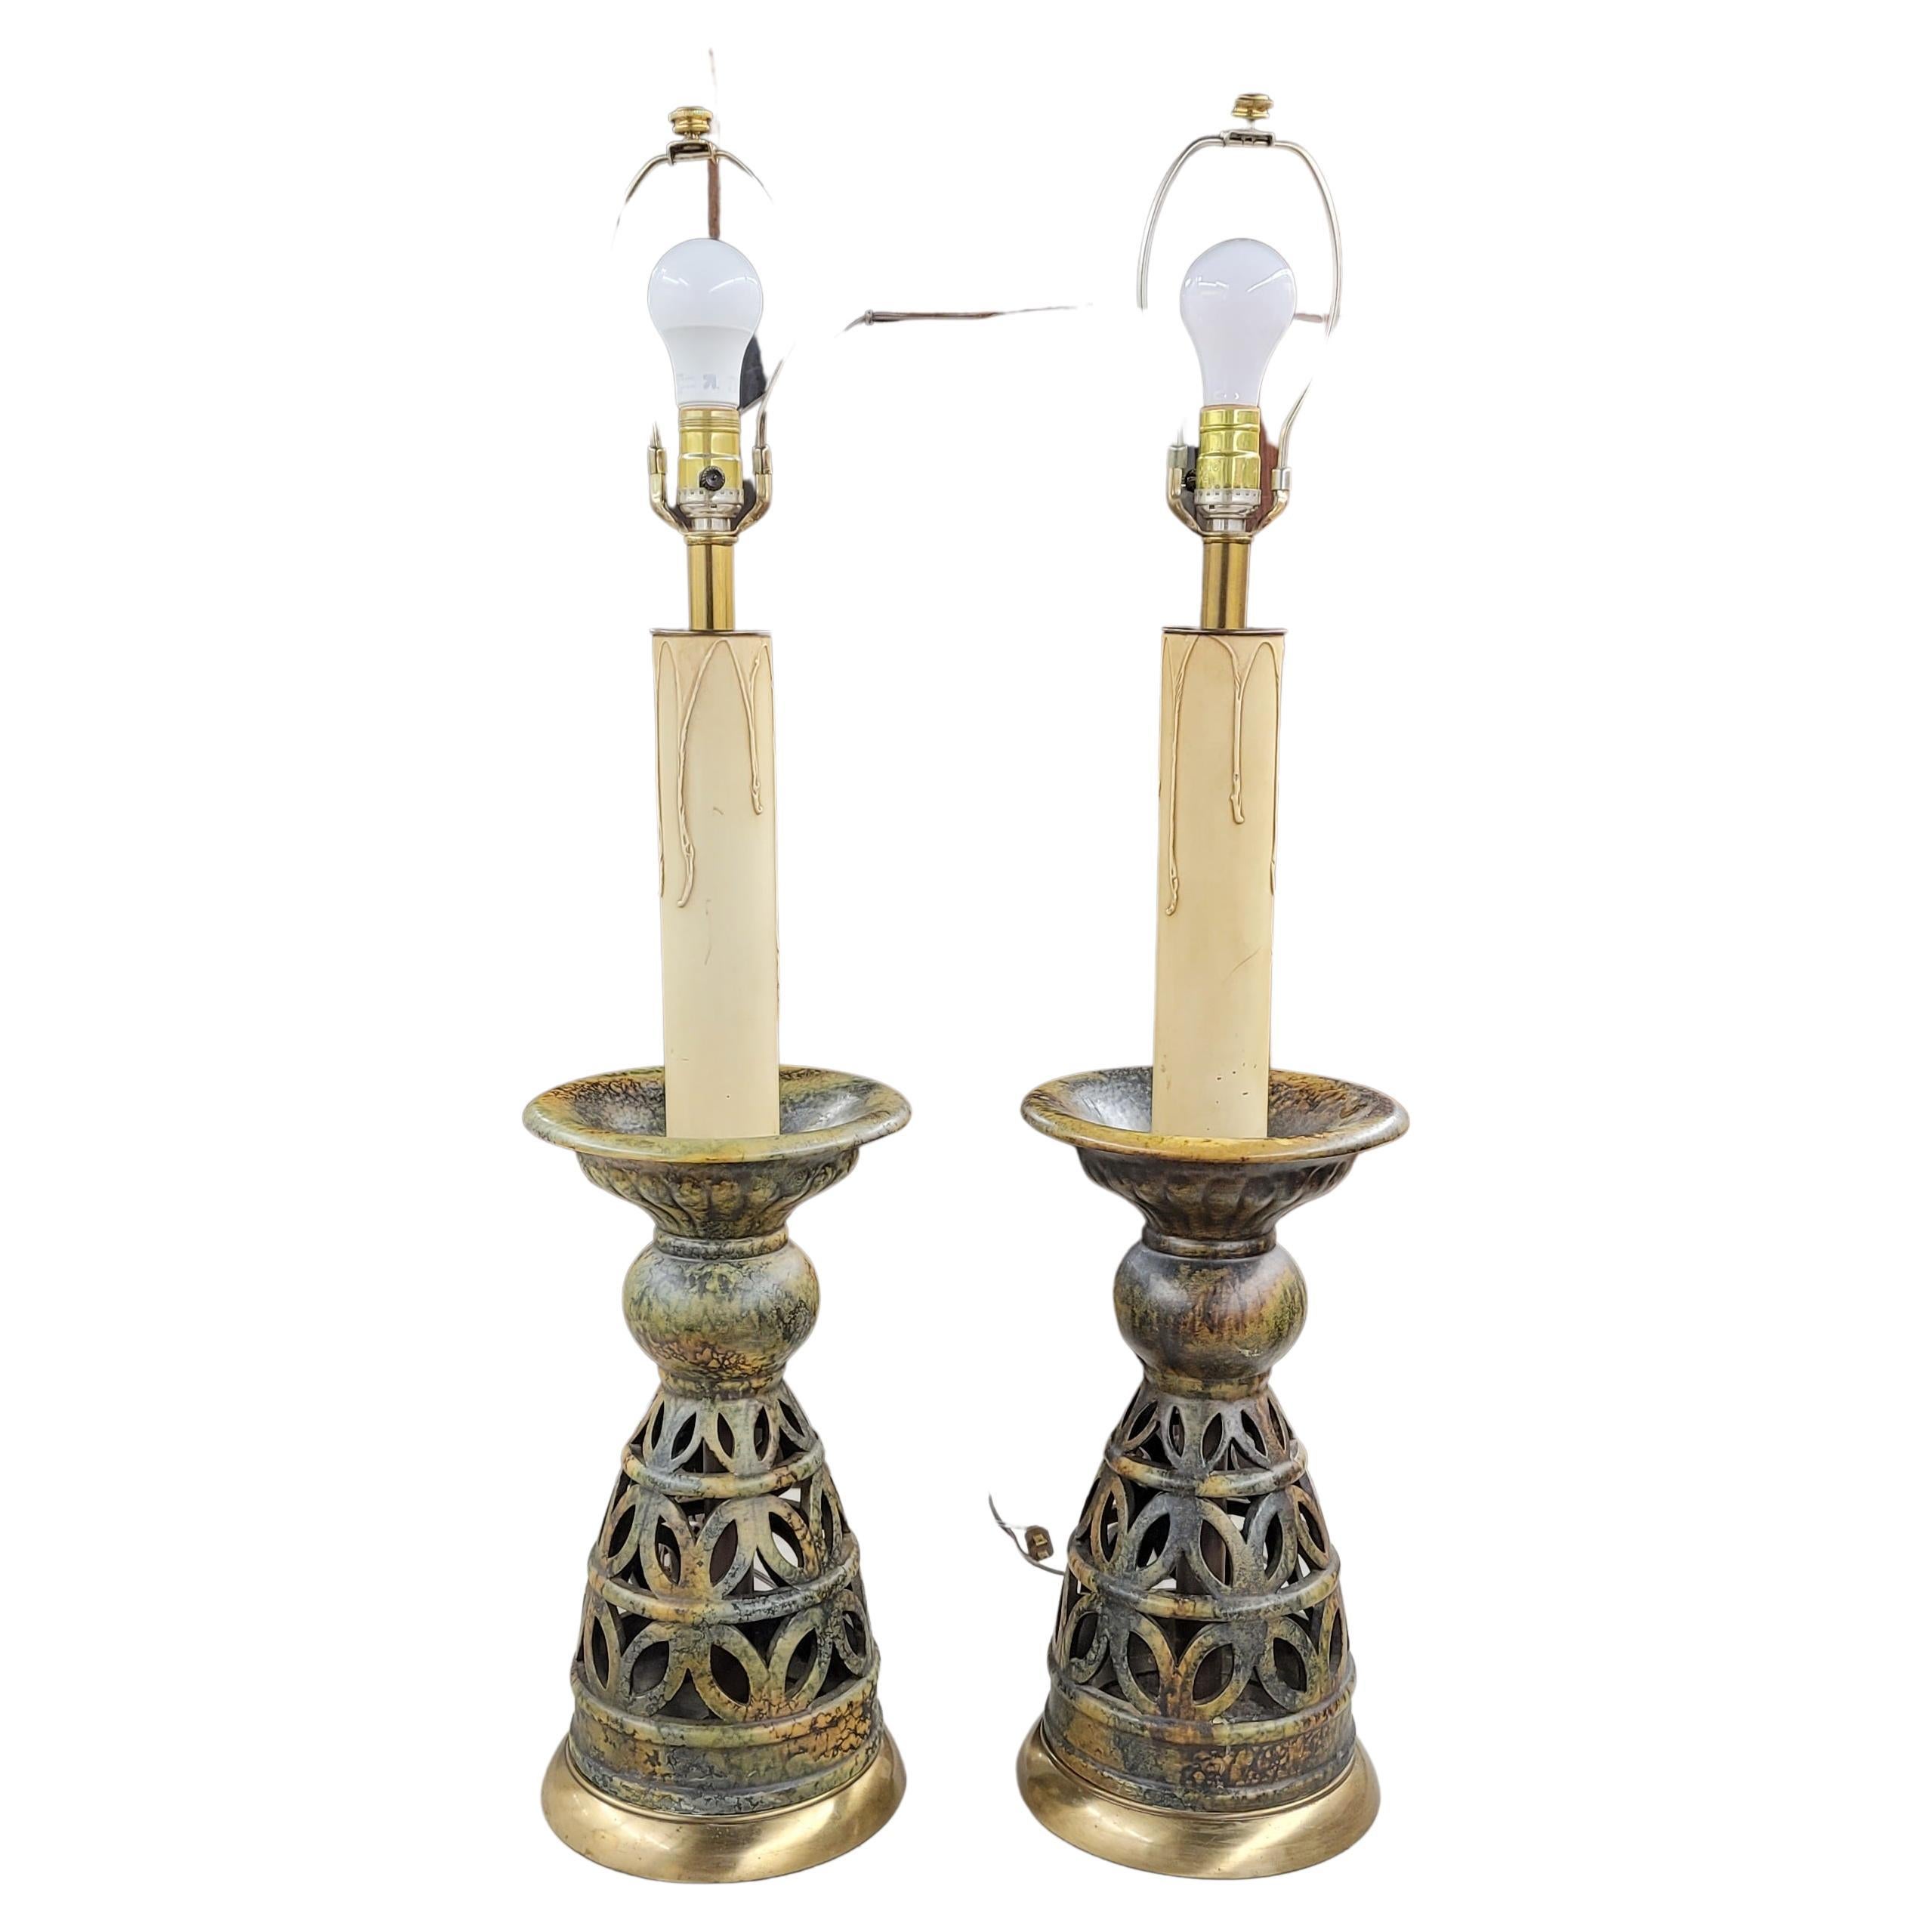 An impressive pair of Anglo-Japanese style carved ceramic Candle Stands and Brass Large Table Lamps.
Very good vintage condition. Measures 8.5